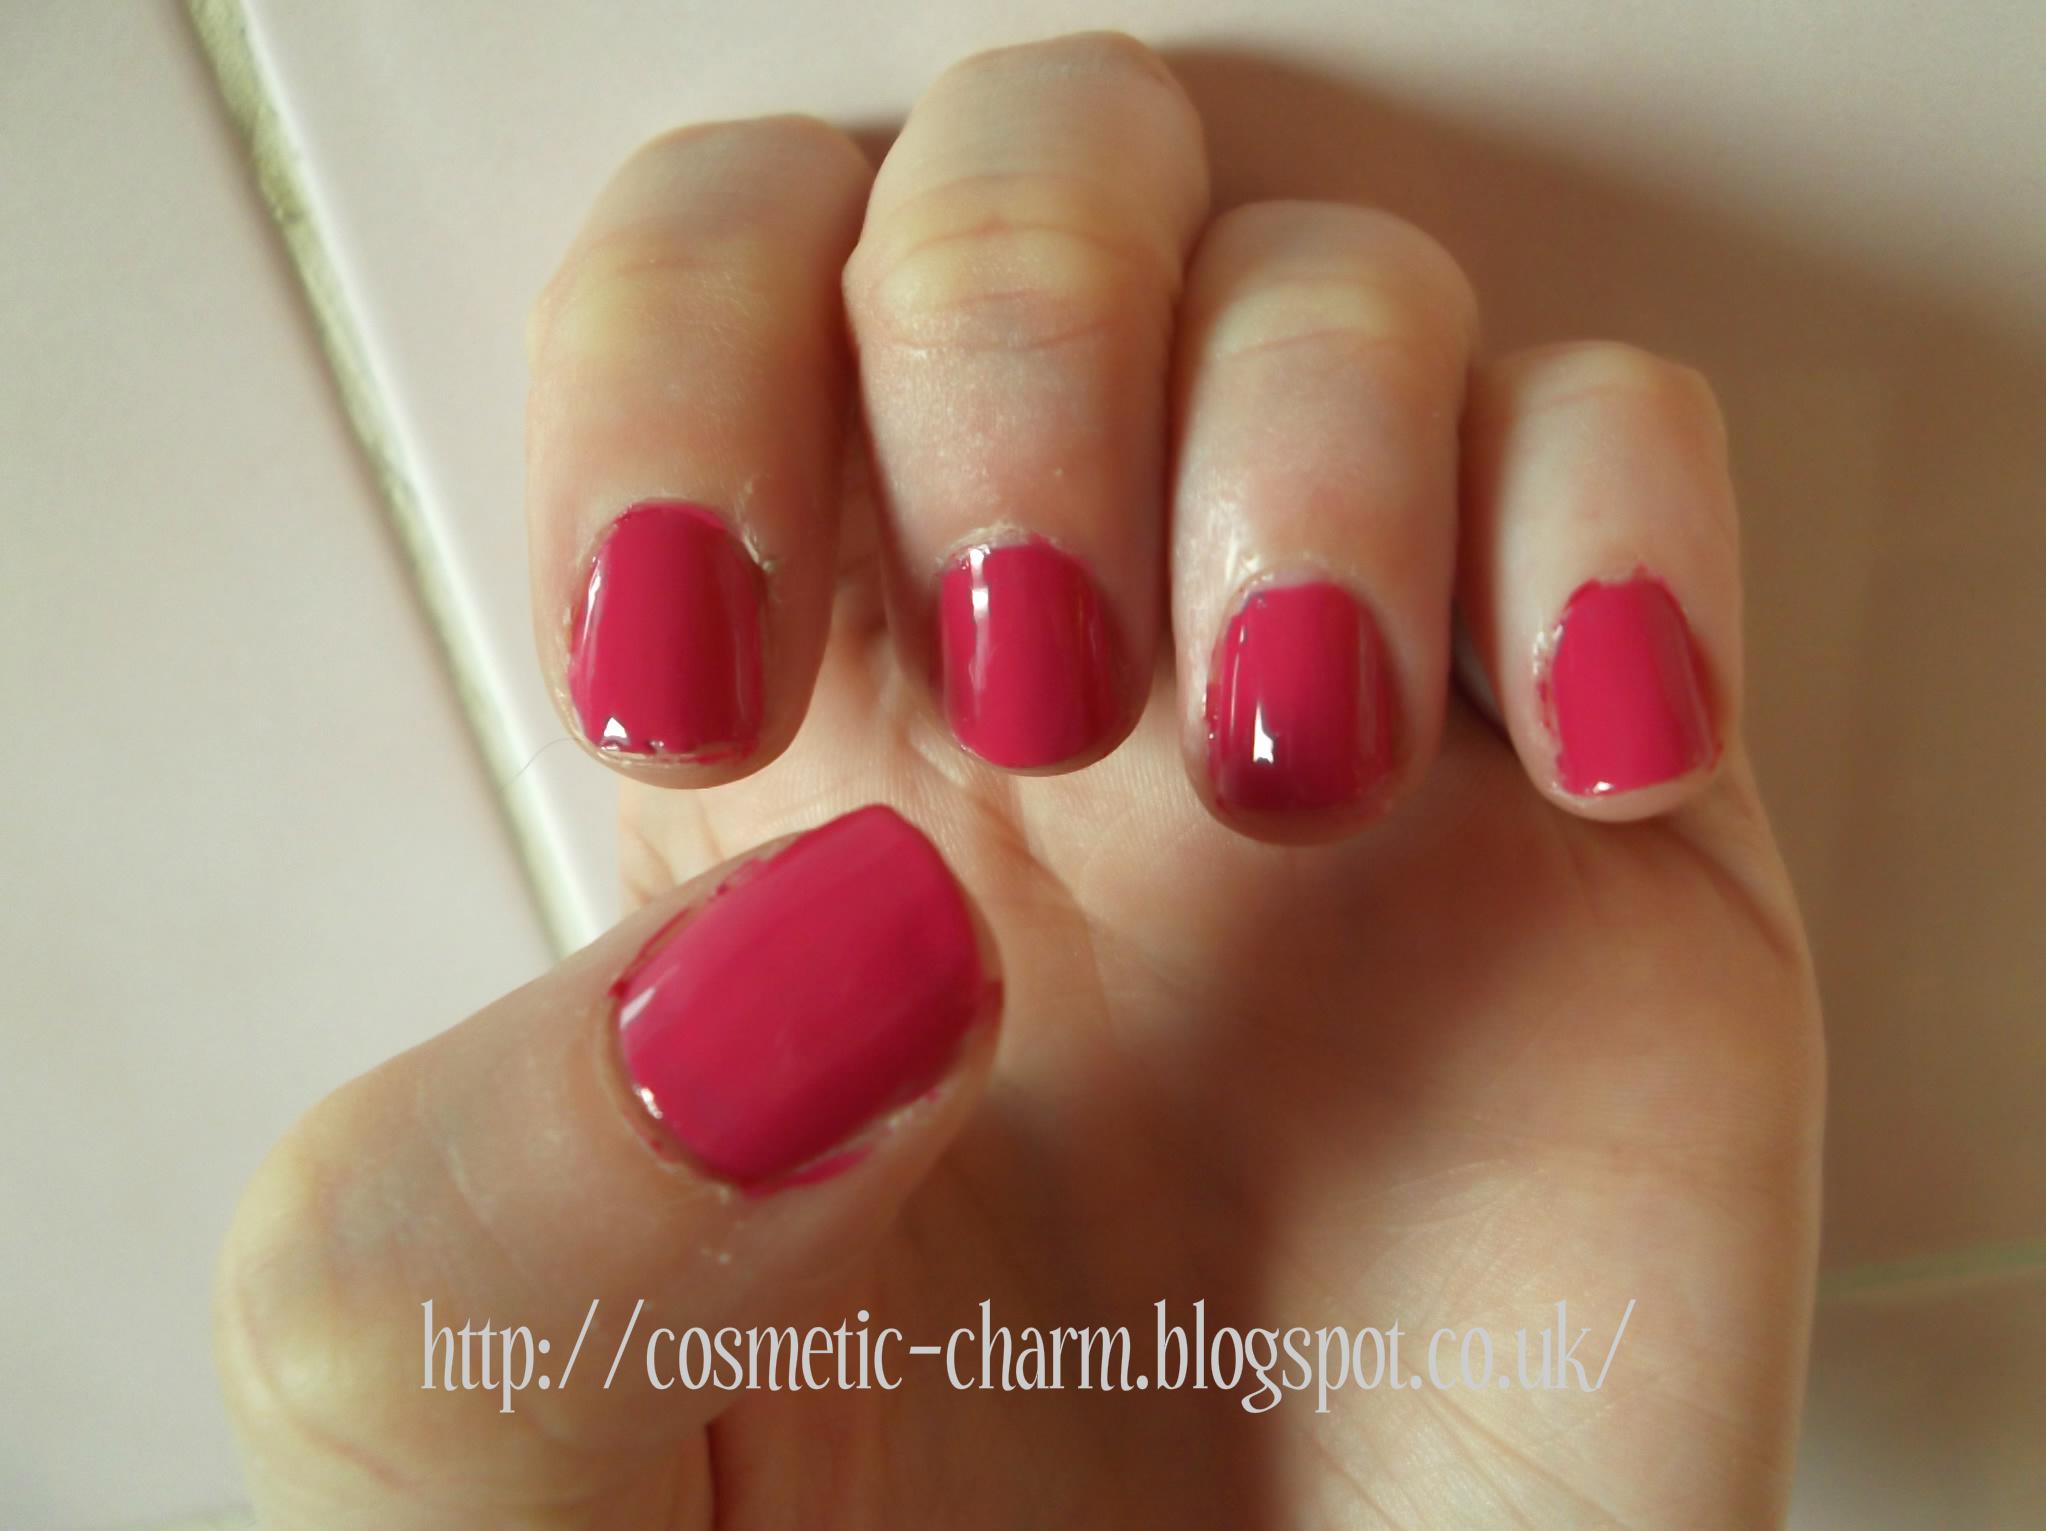 Beauty UK Paint For Life Nail Polish Trio 'strength' is the brightest shade